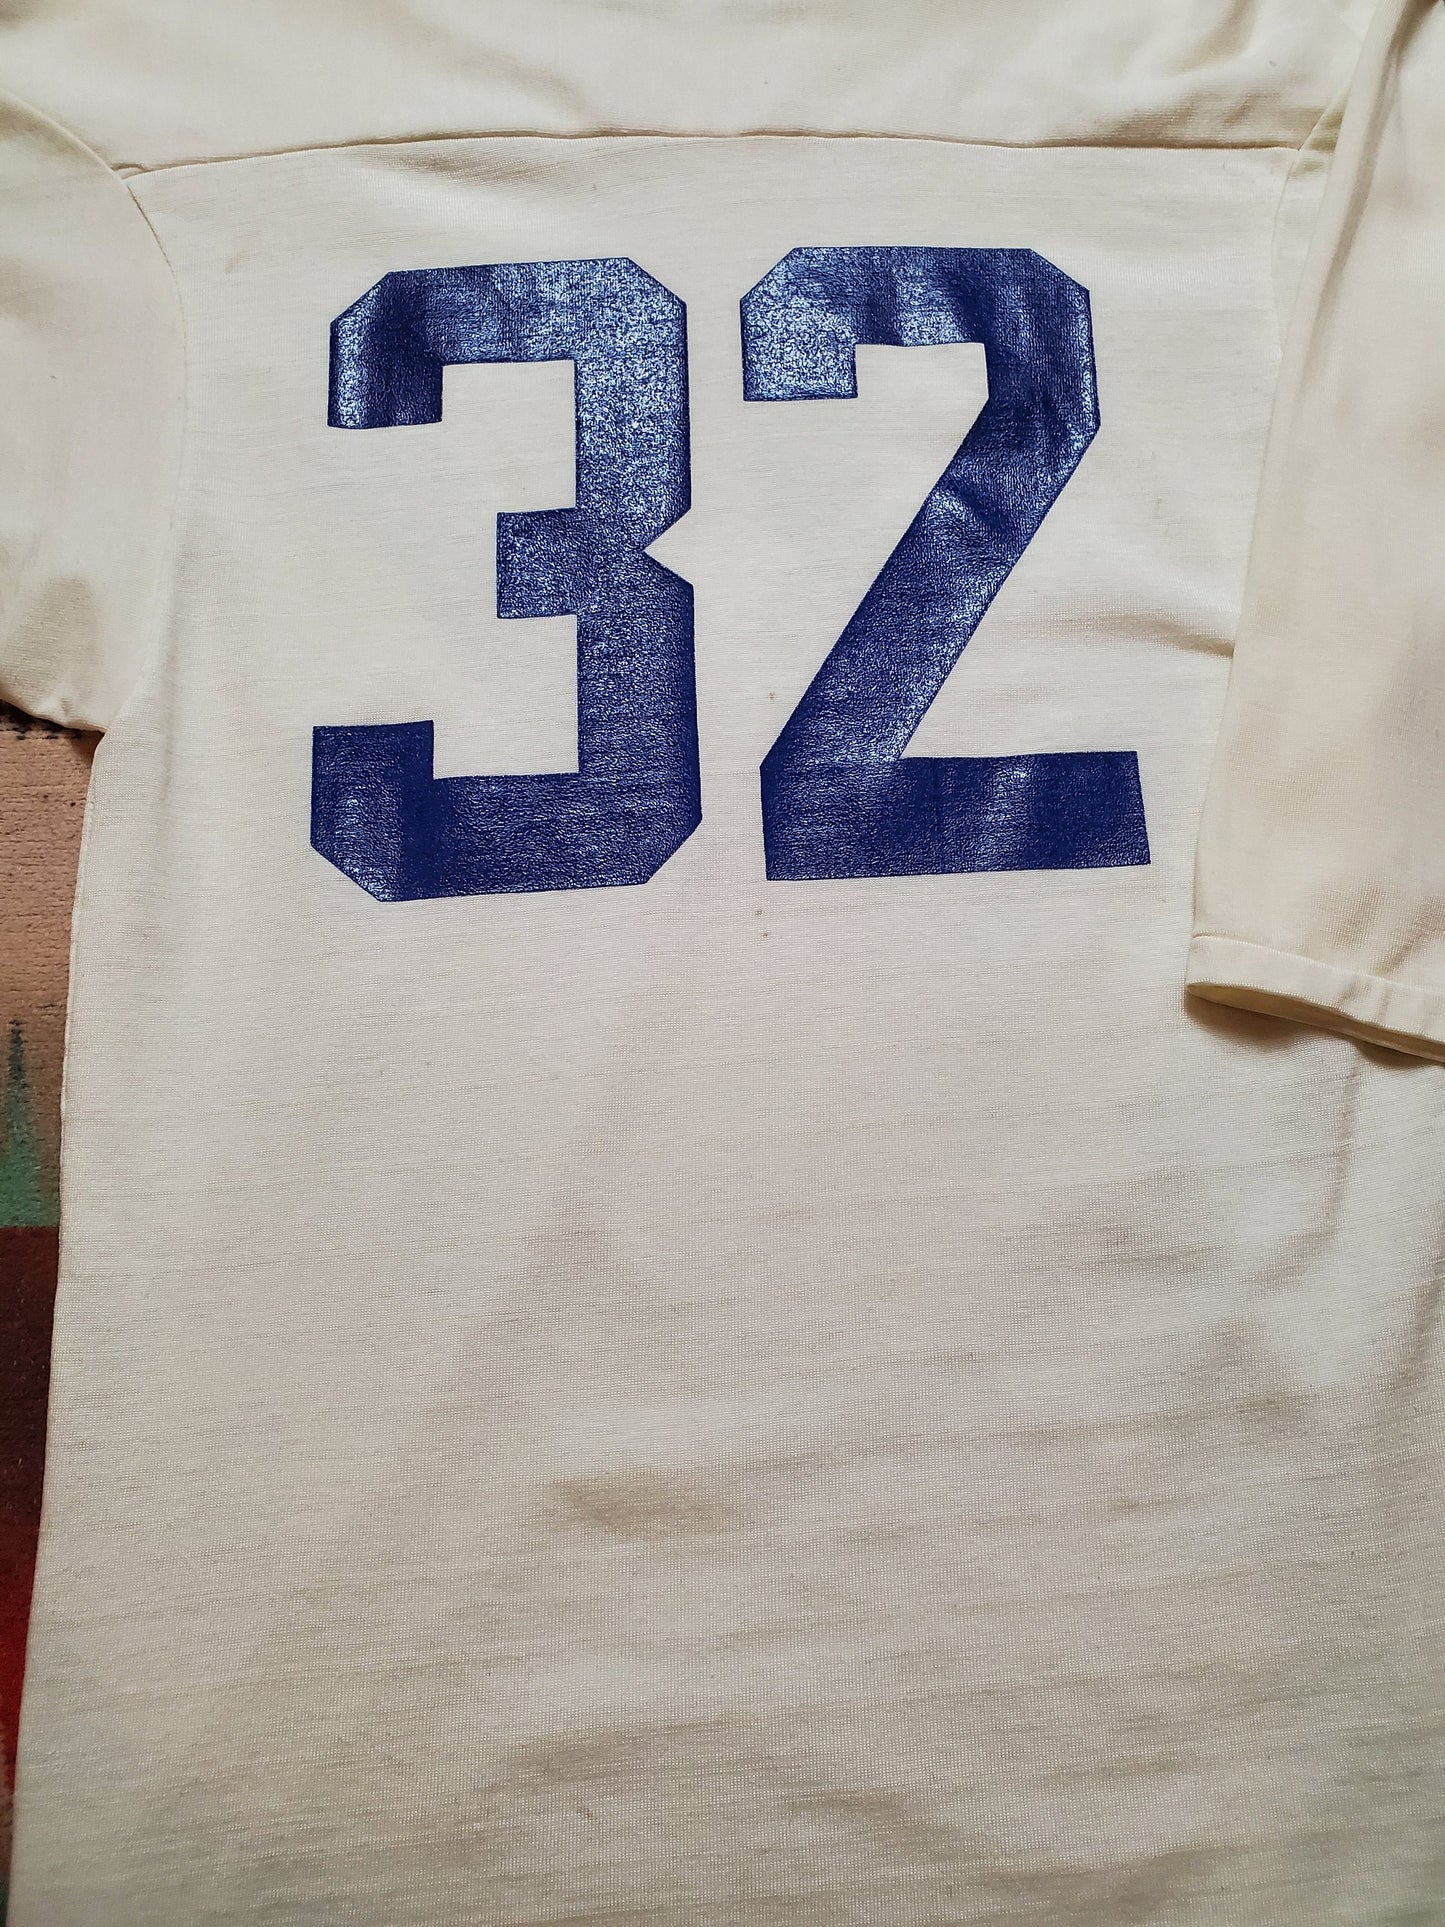 1970s Southern Athletic Football Jersey #32 Made in USA Size S